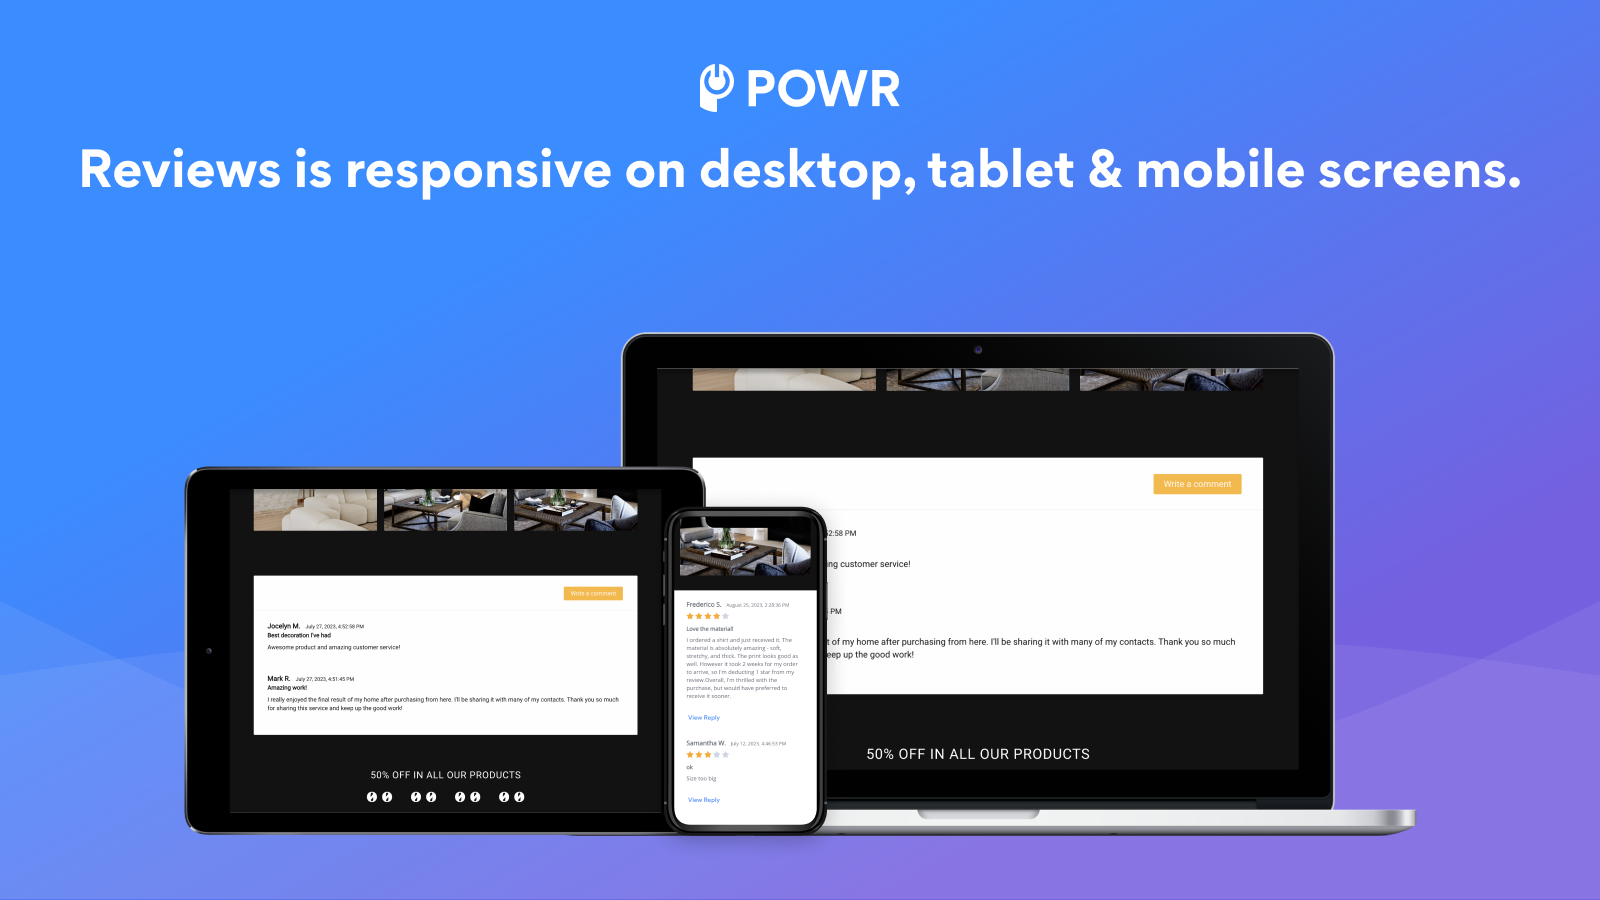 Product reviews are responsive on mobile, desktop and tablet.